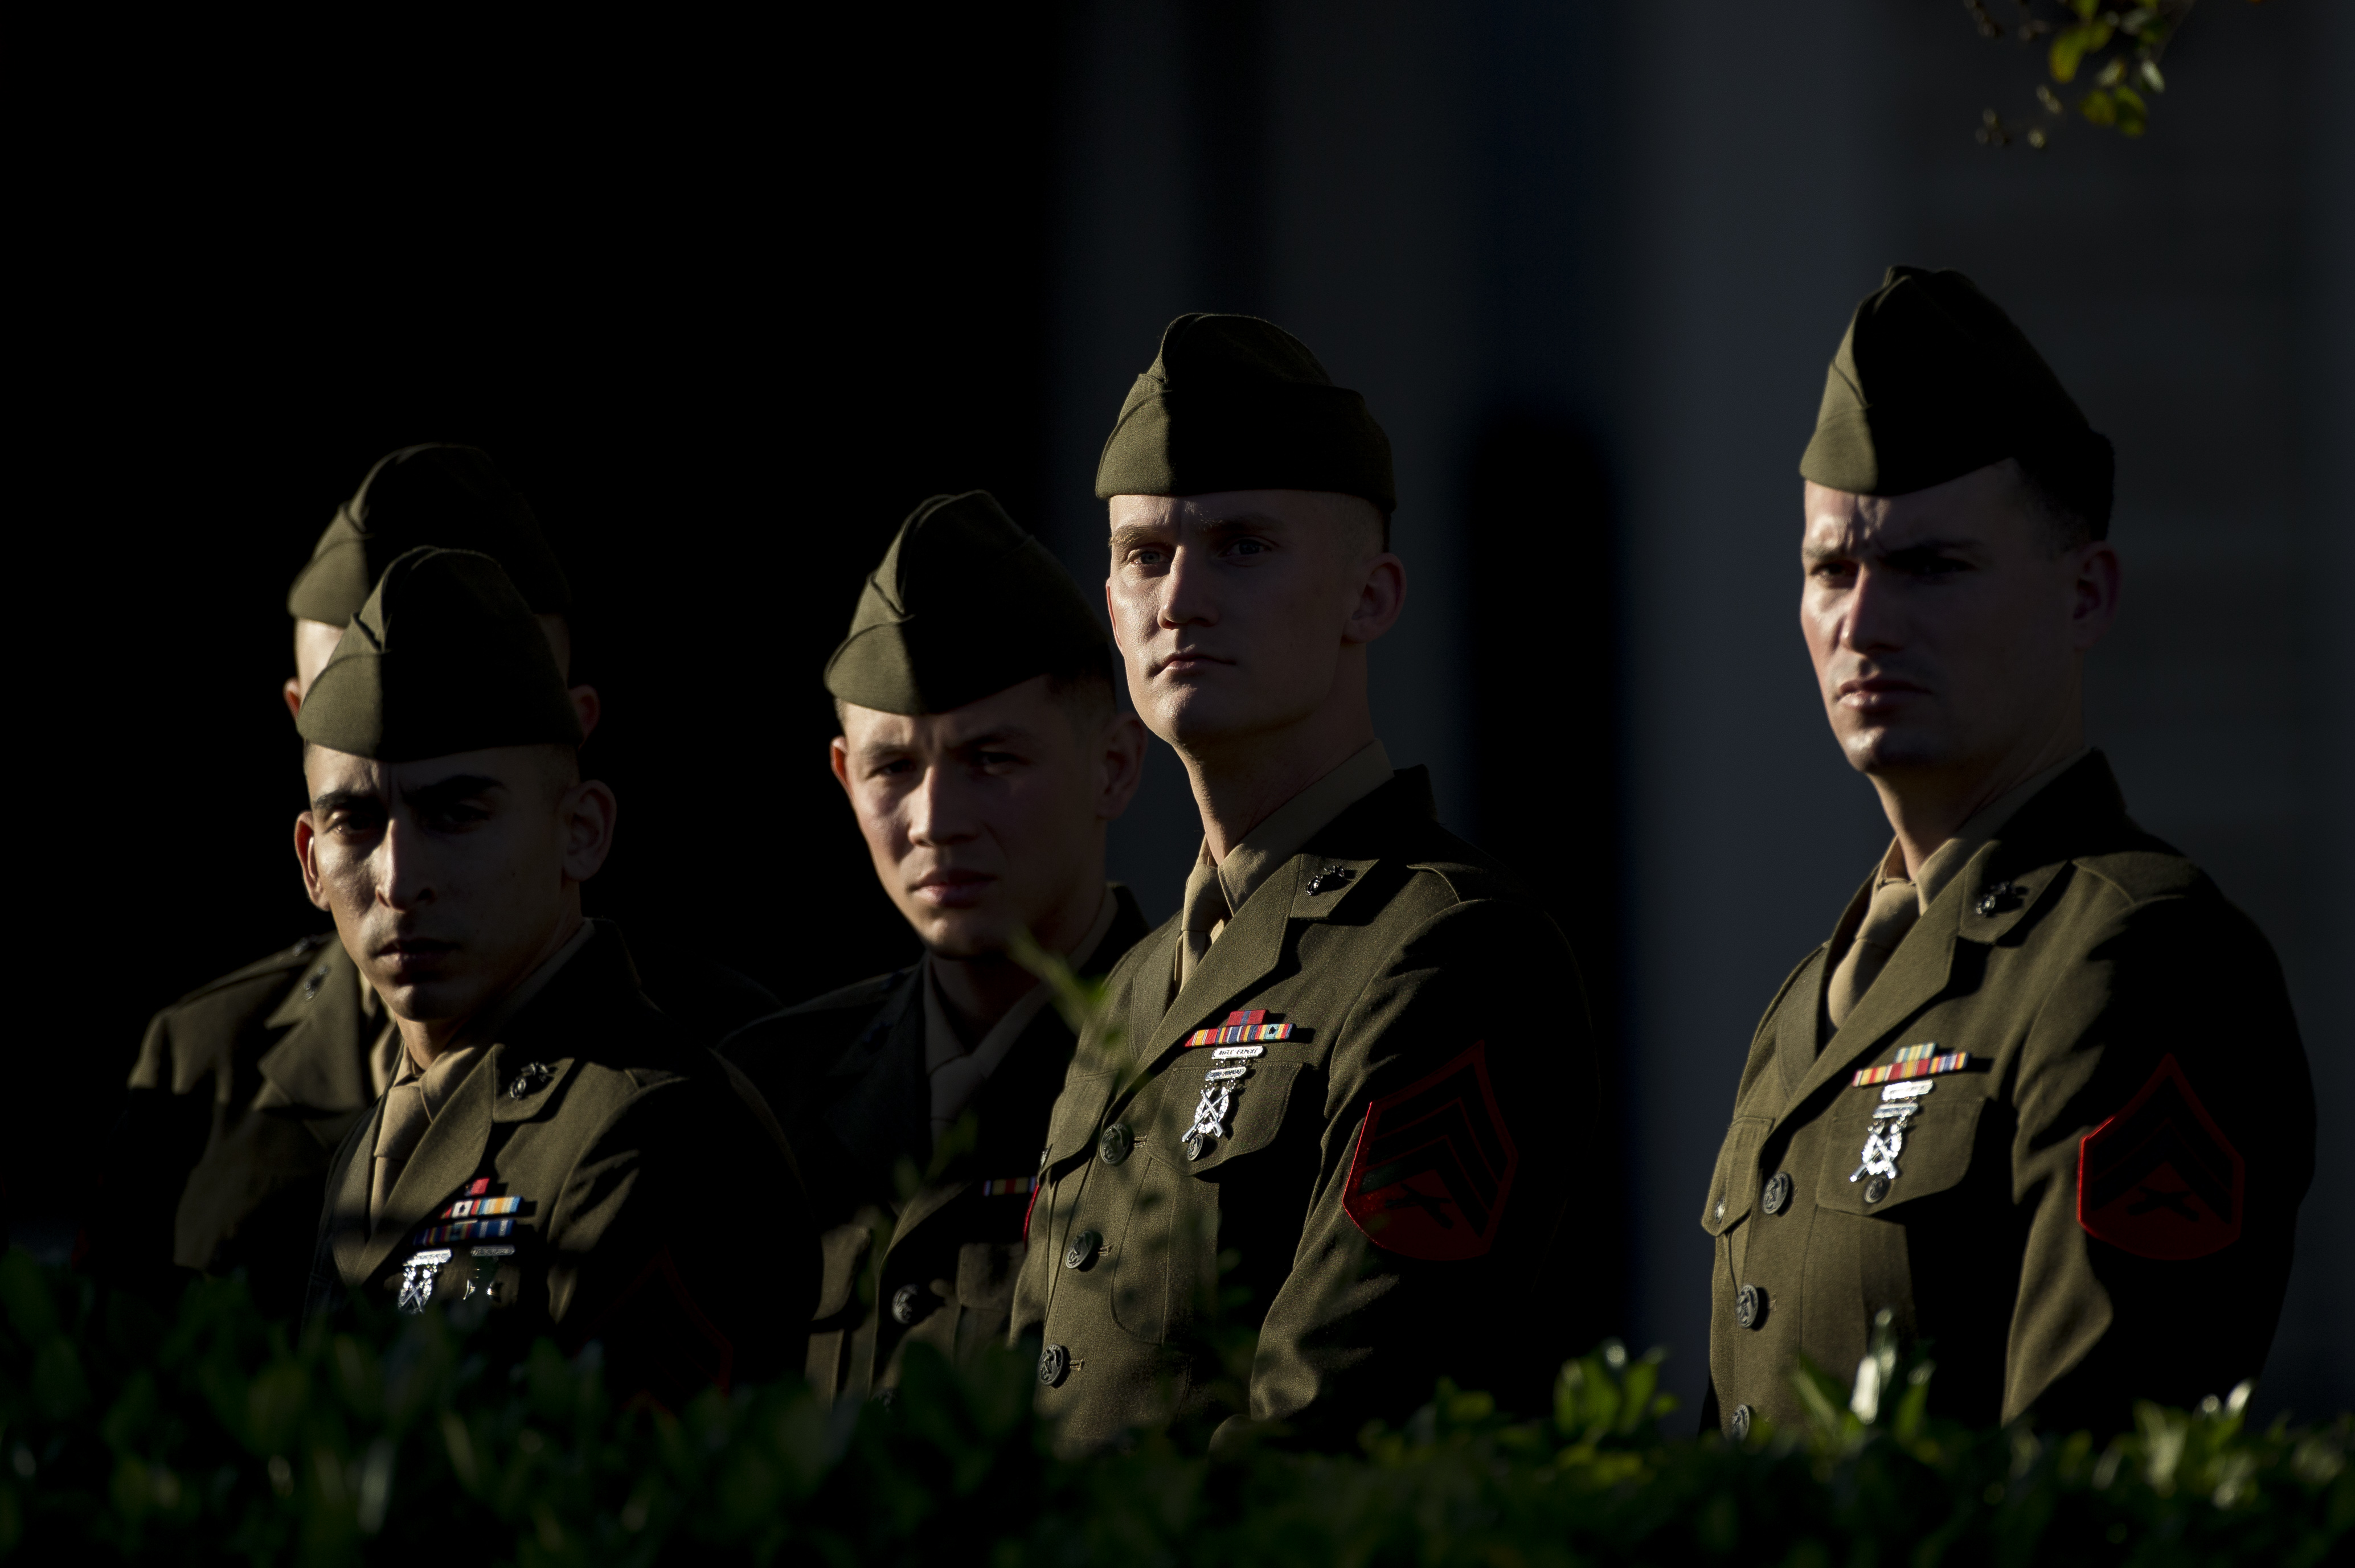 Members of the U.S. Marine Corps in their dress greens stand outside where the remains of President George H.W. Bush are kept before the first departure ceremony.